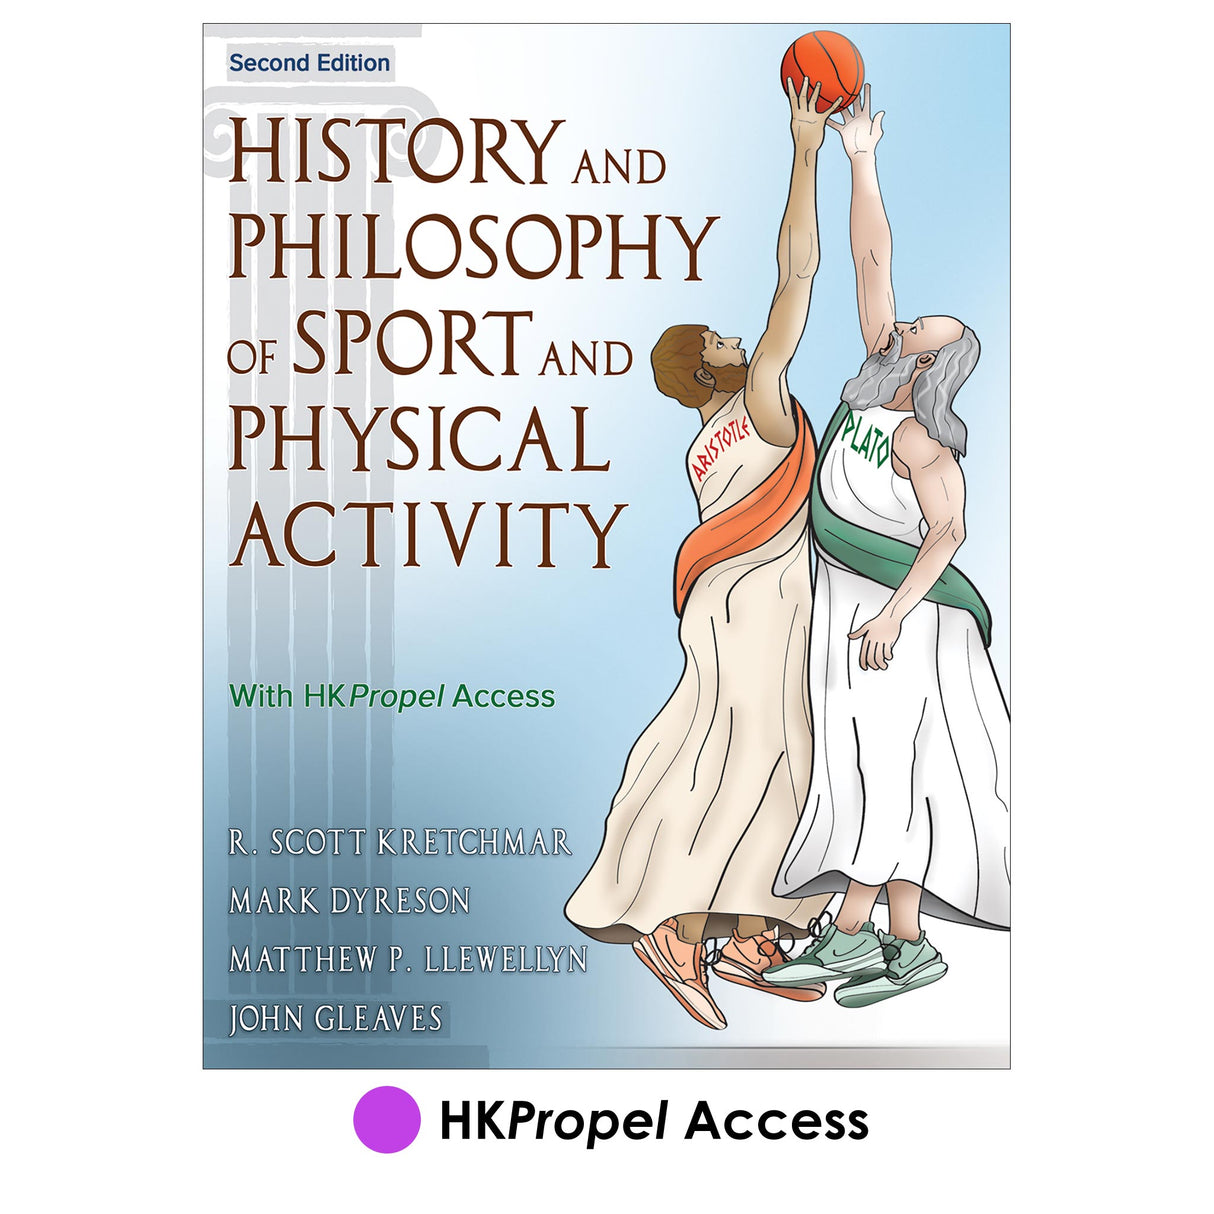 History and Philosophy of Sport and Physical Activity 2nd Edition HKPropel Access